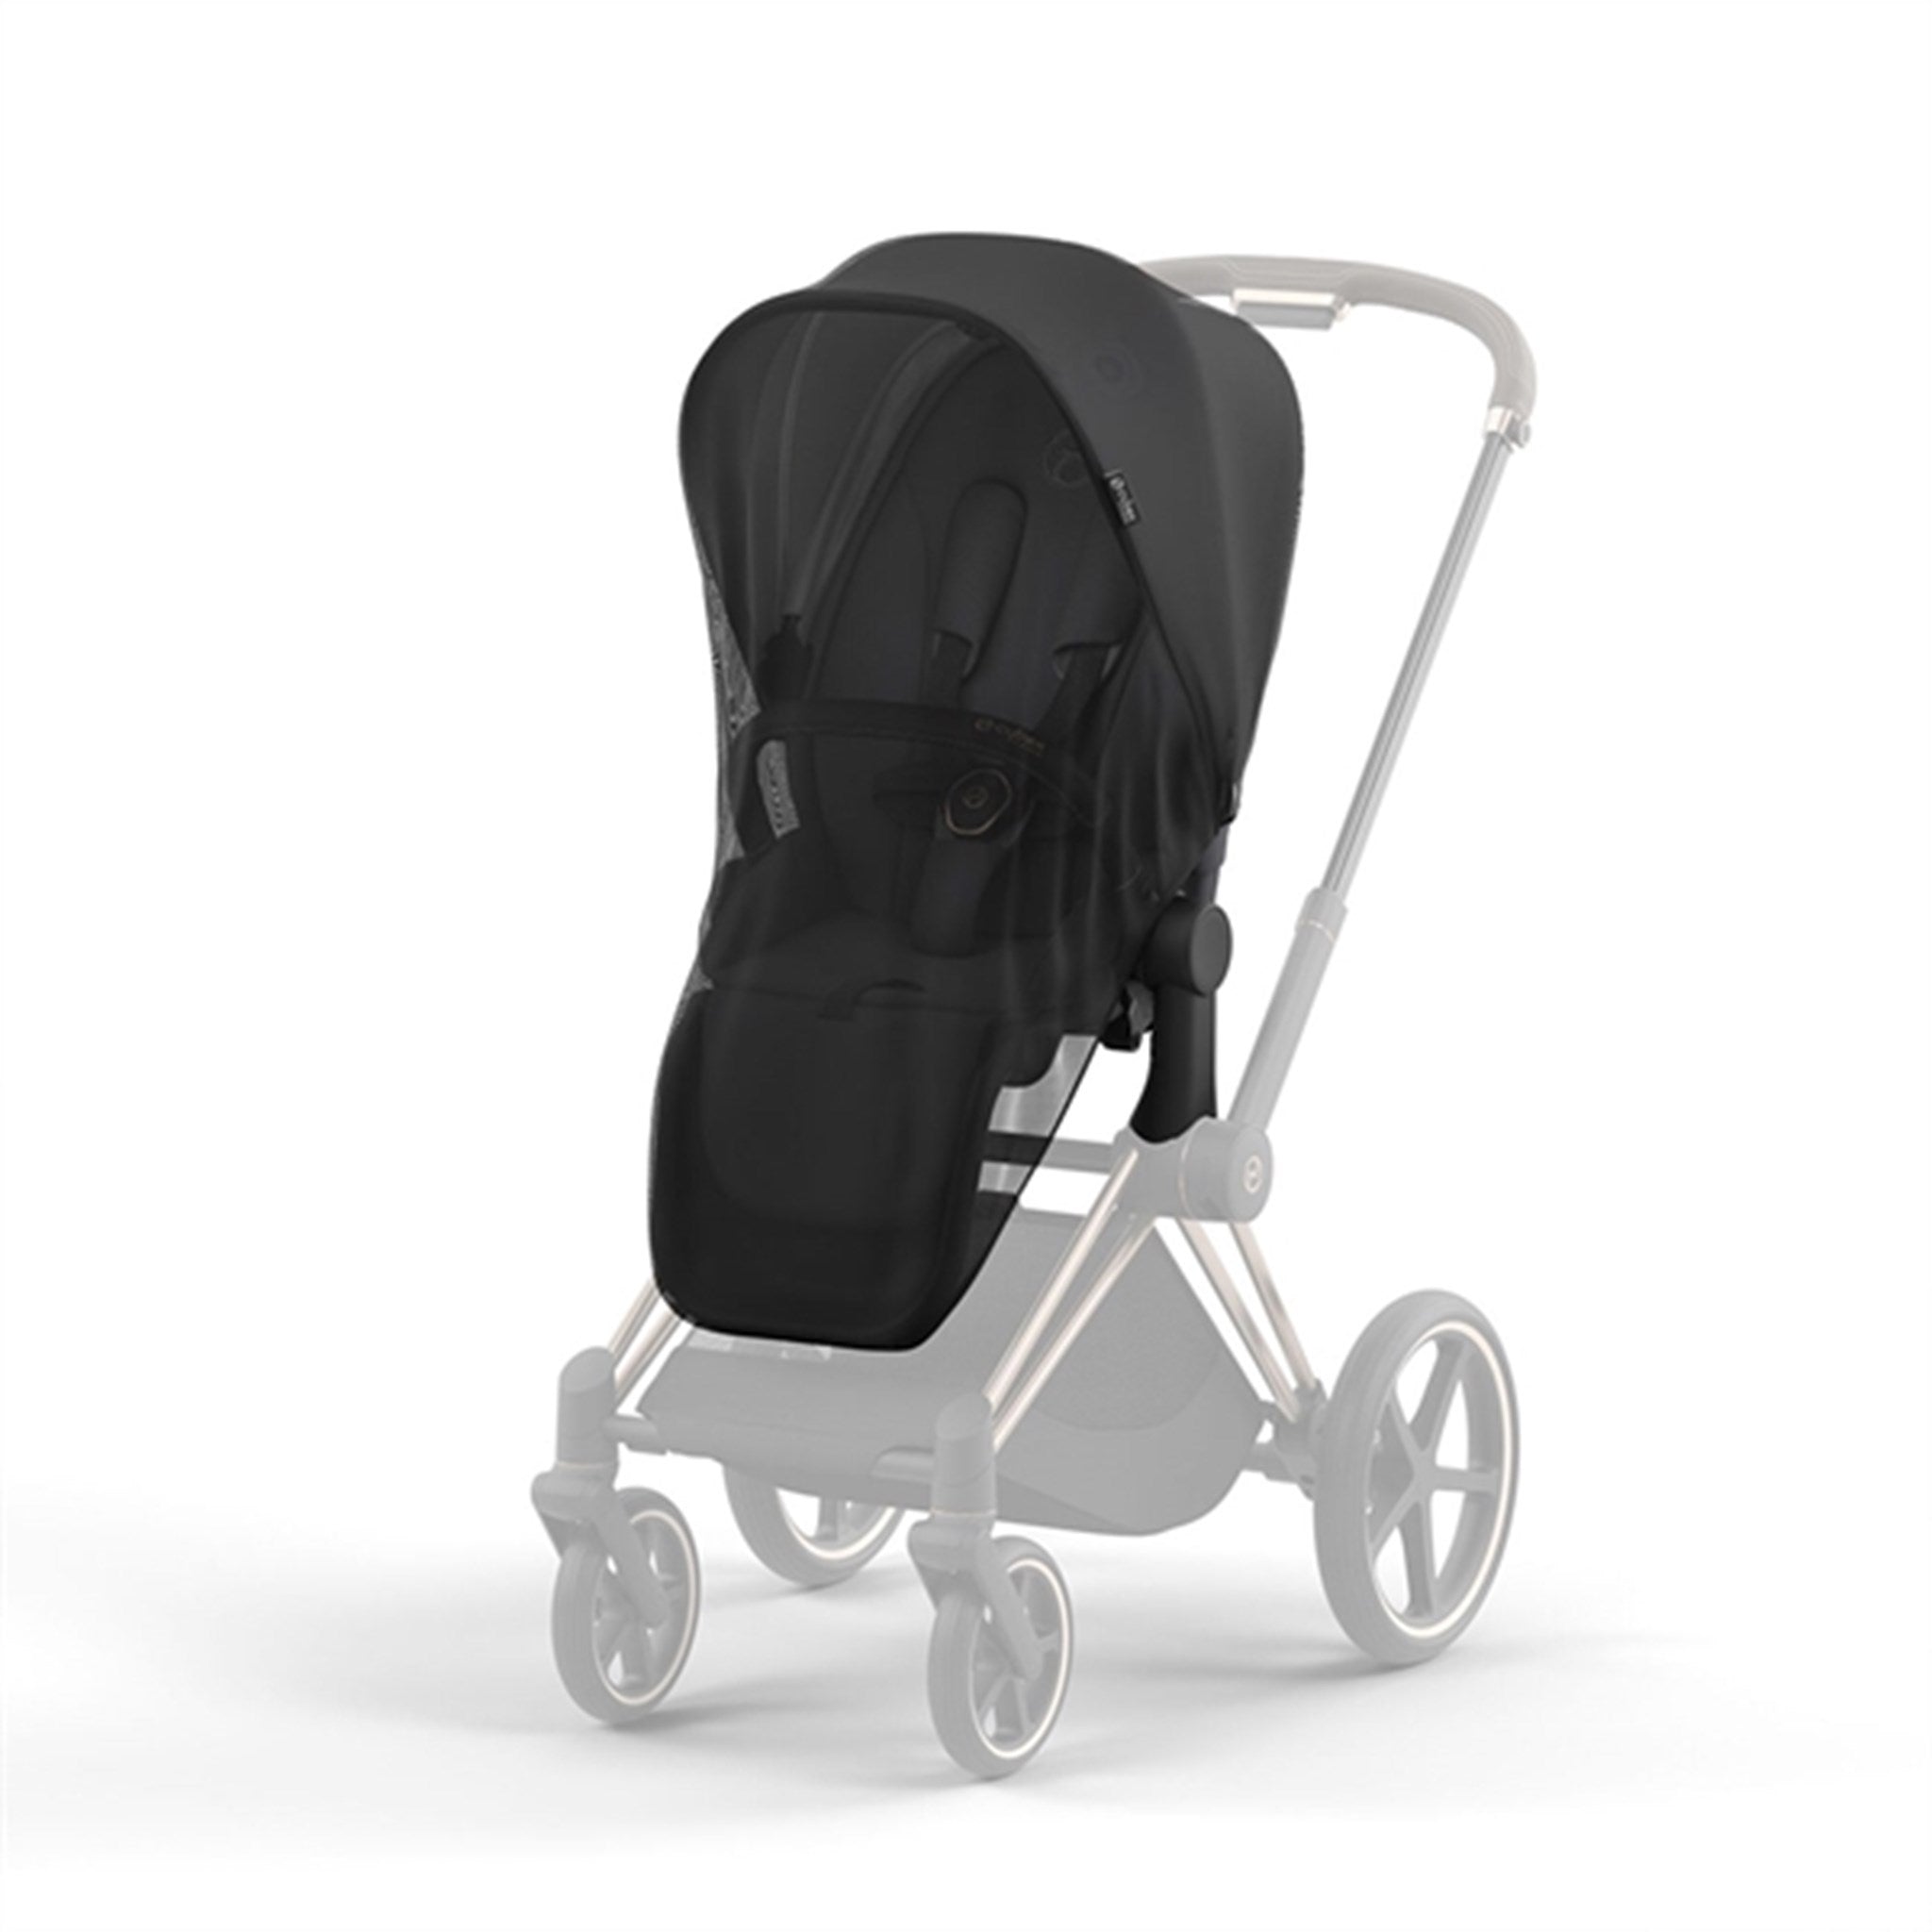 Cybex Insect net Lux for Pram Seat Black